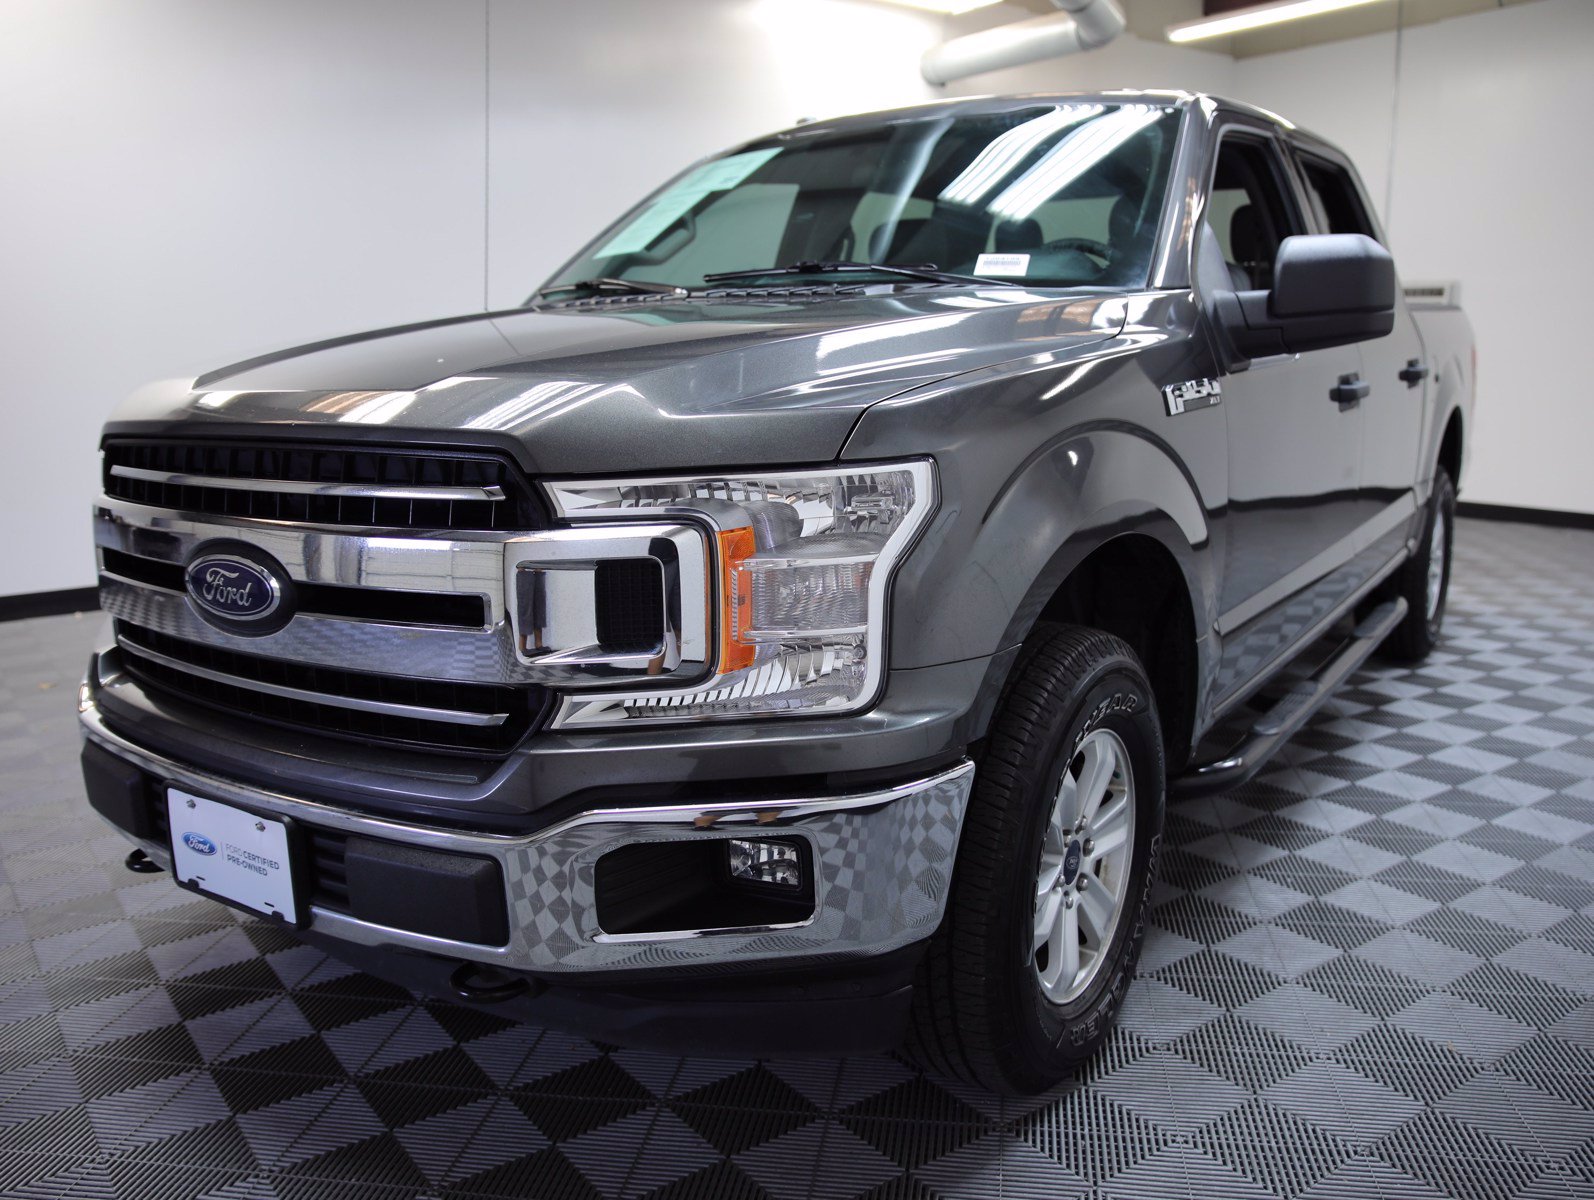 Certified Pre-Owned 2018 Ford F-150 XLT Crew Cab Pickup in San Antonio